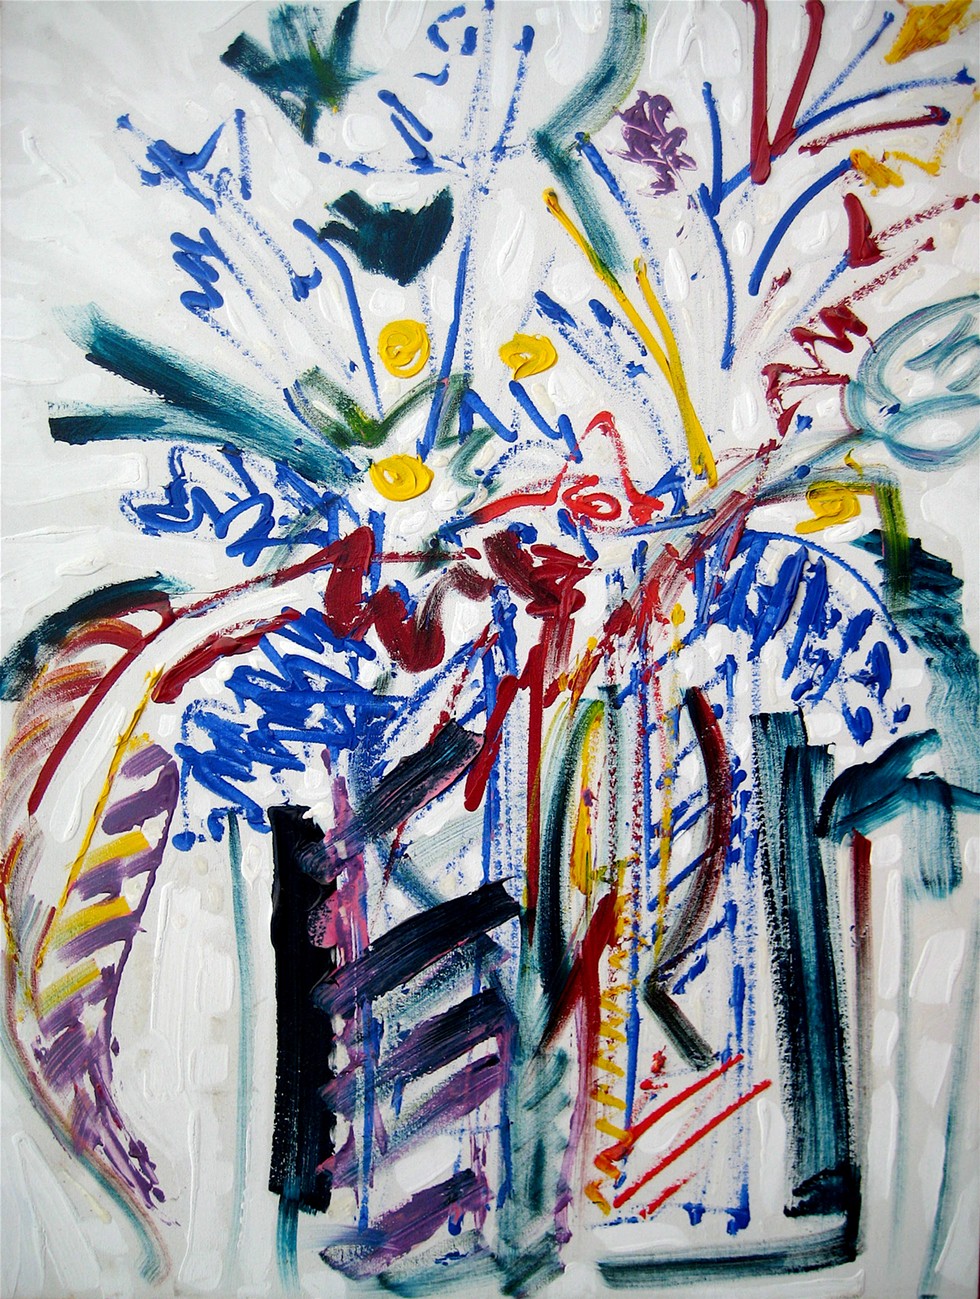 primary_2_30x40_acrylic_oil_and_ink_on_canvas_2009.jpg